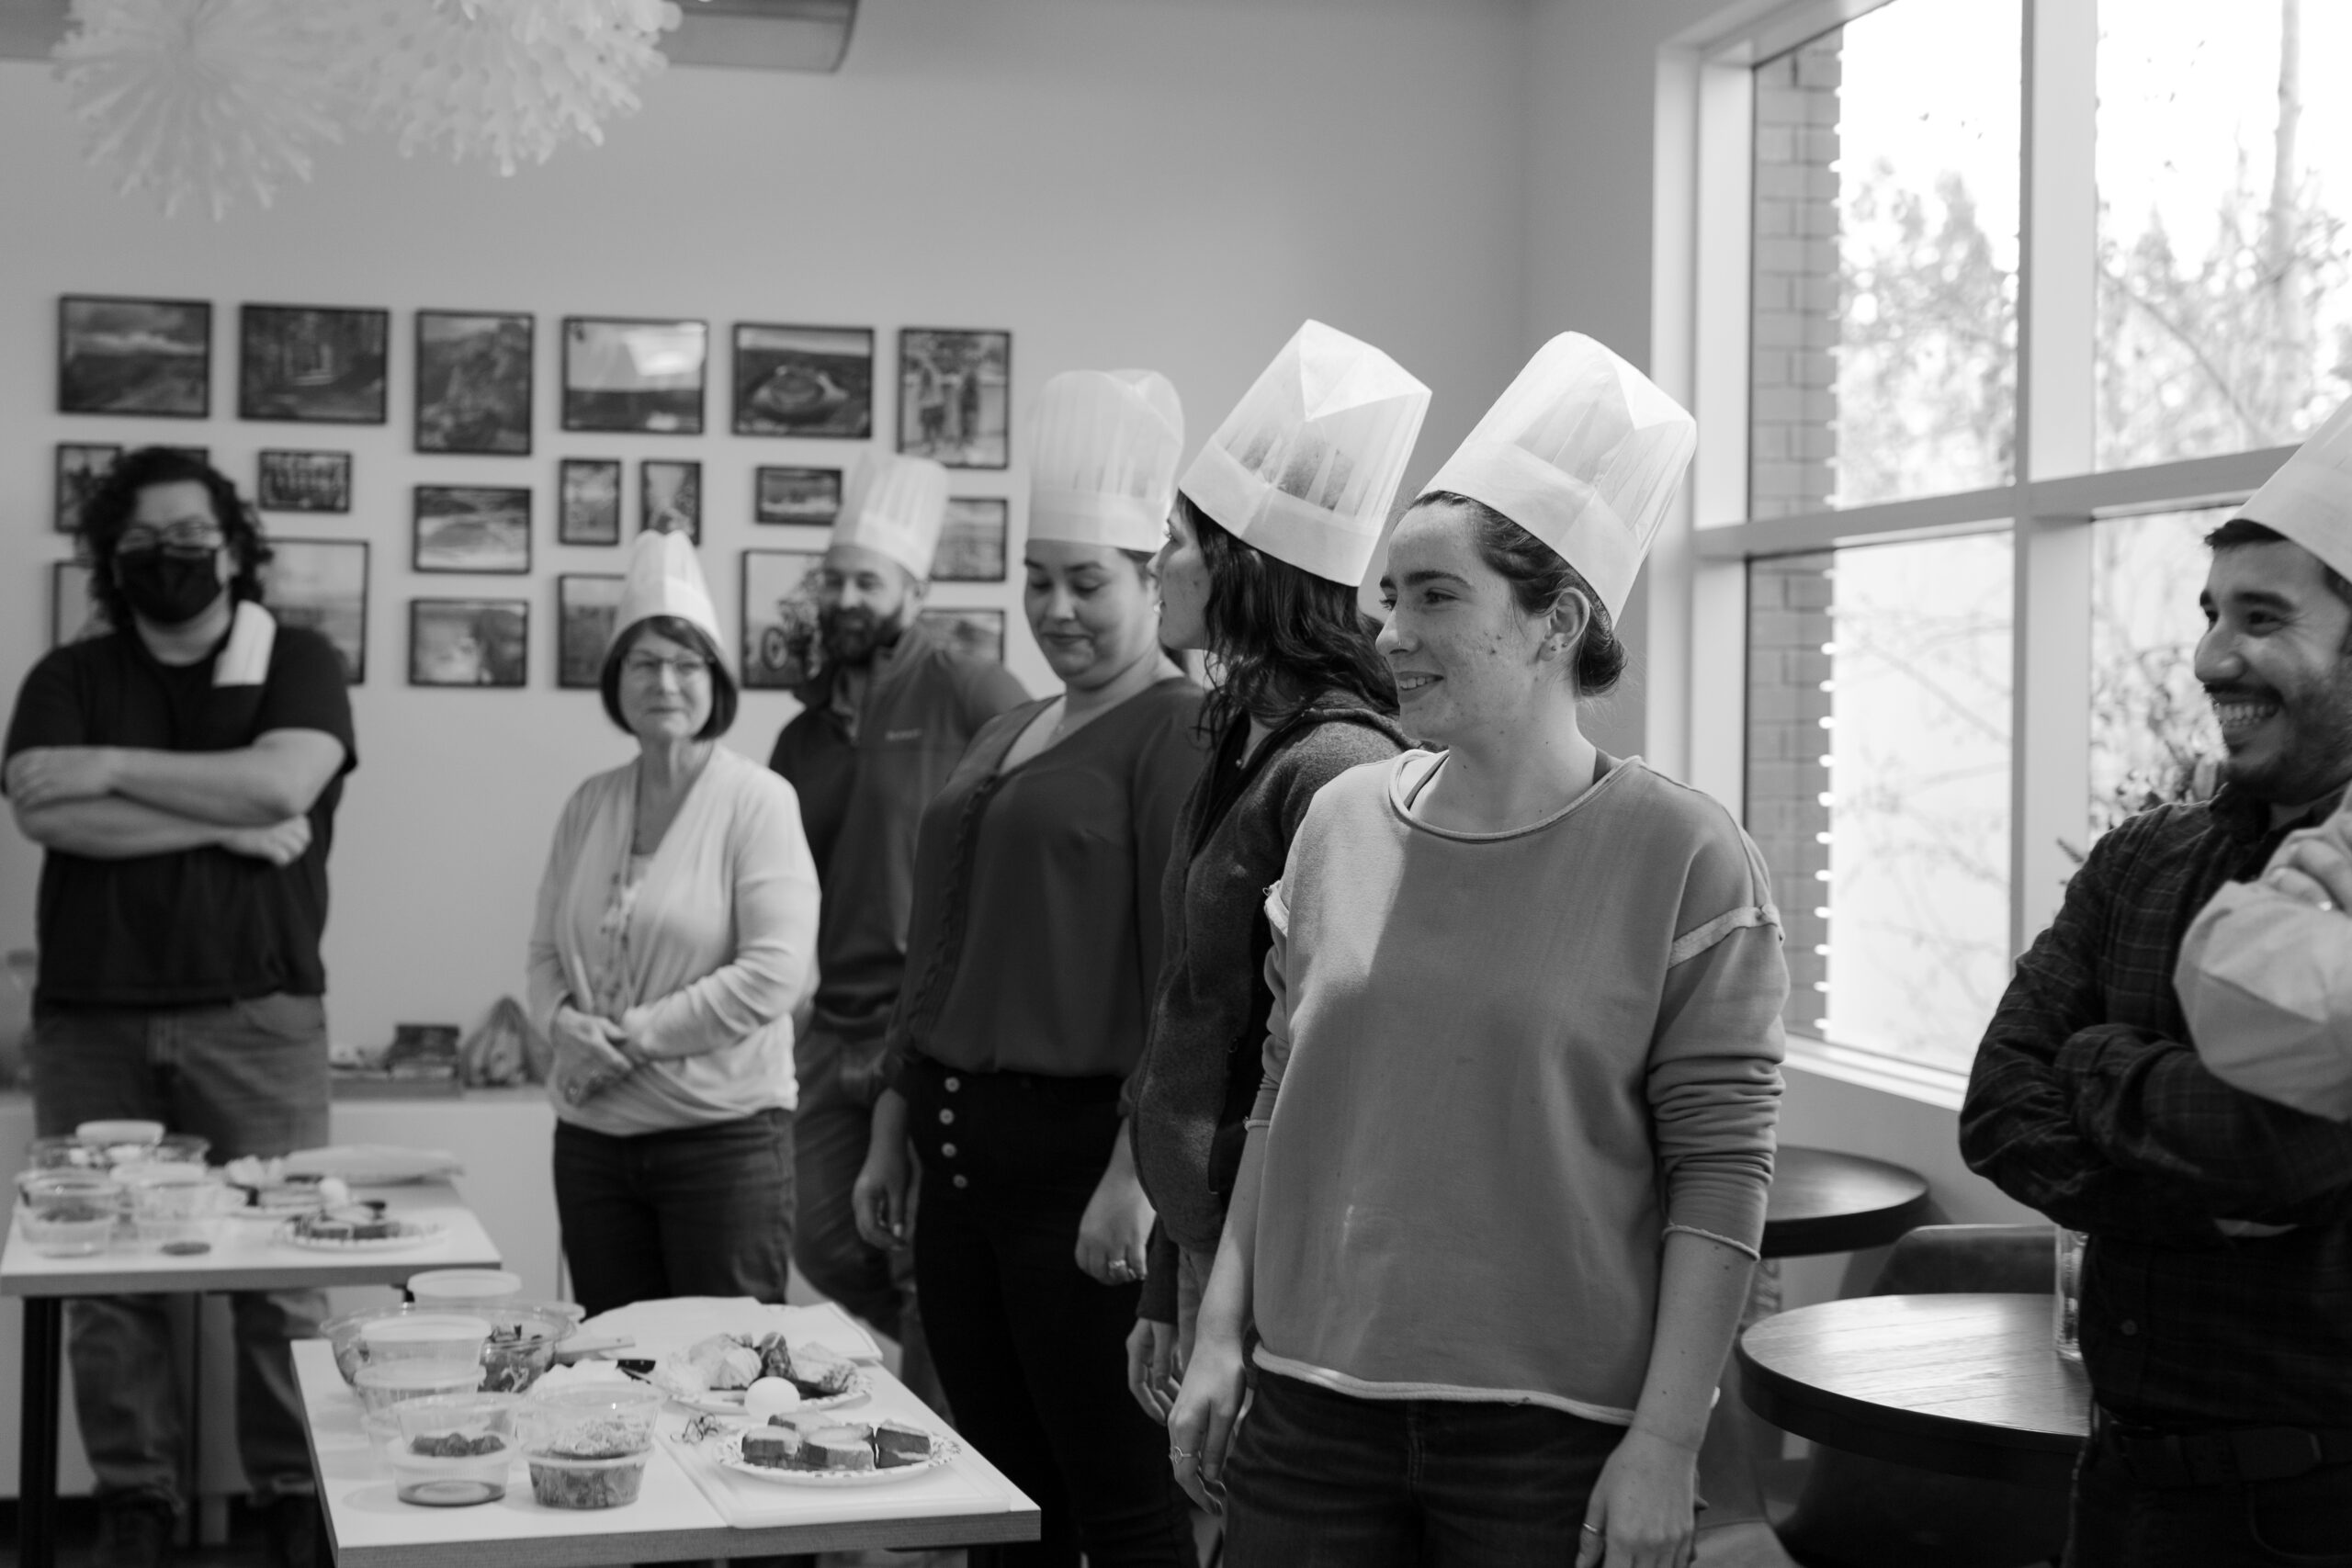 Black and white image of engineers in chef hats